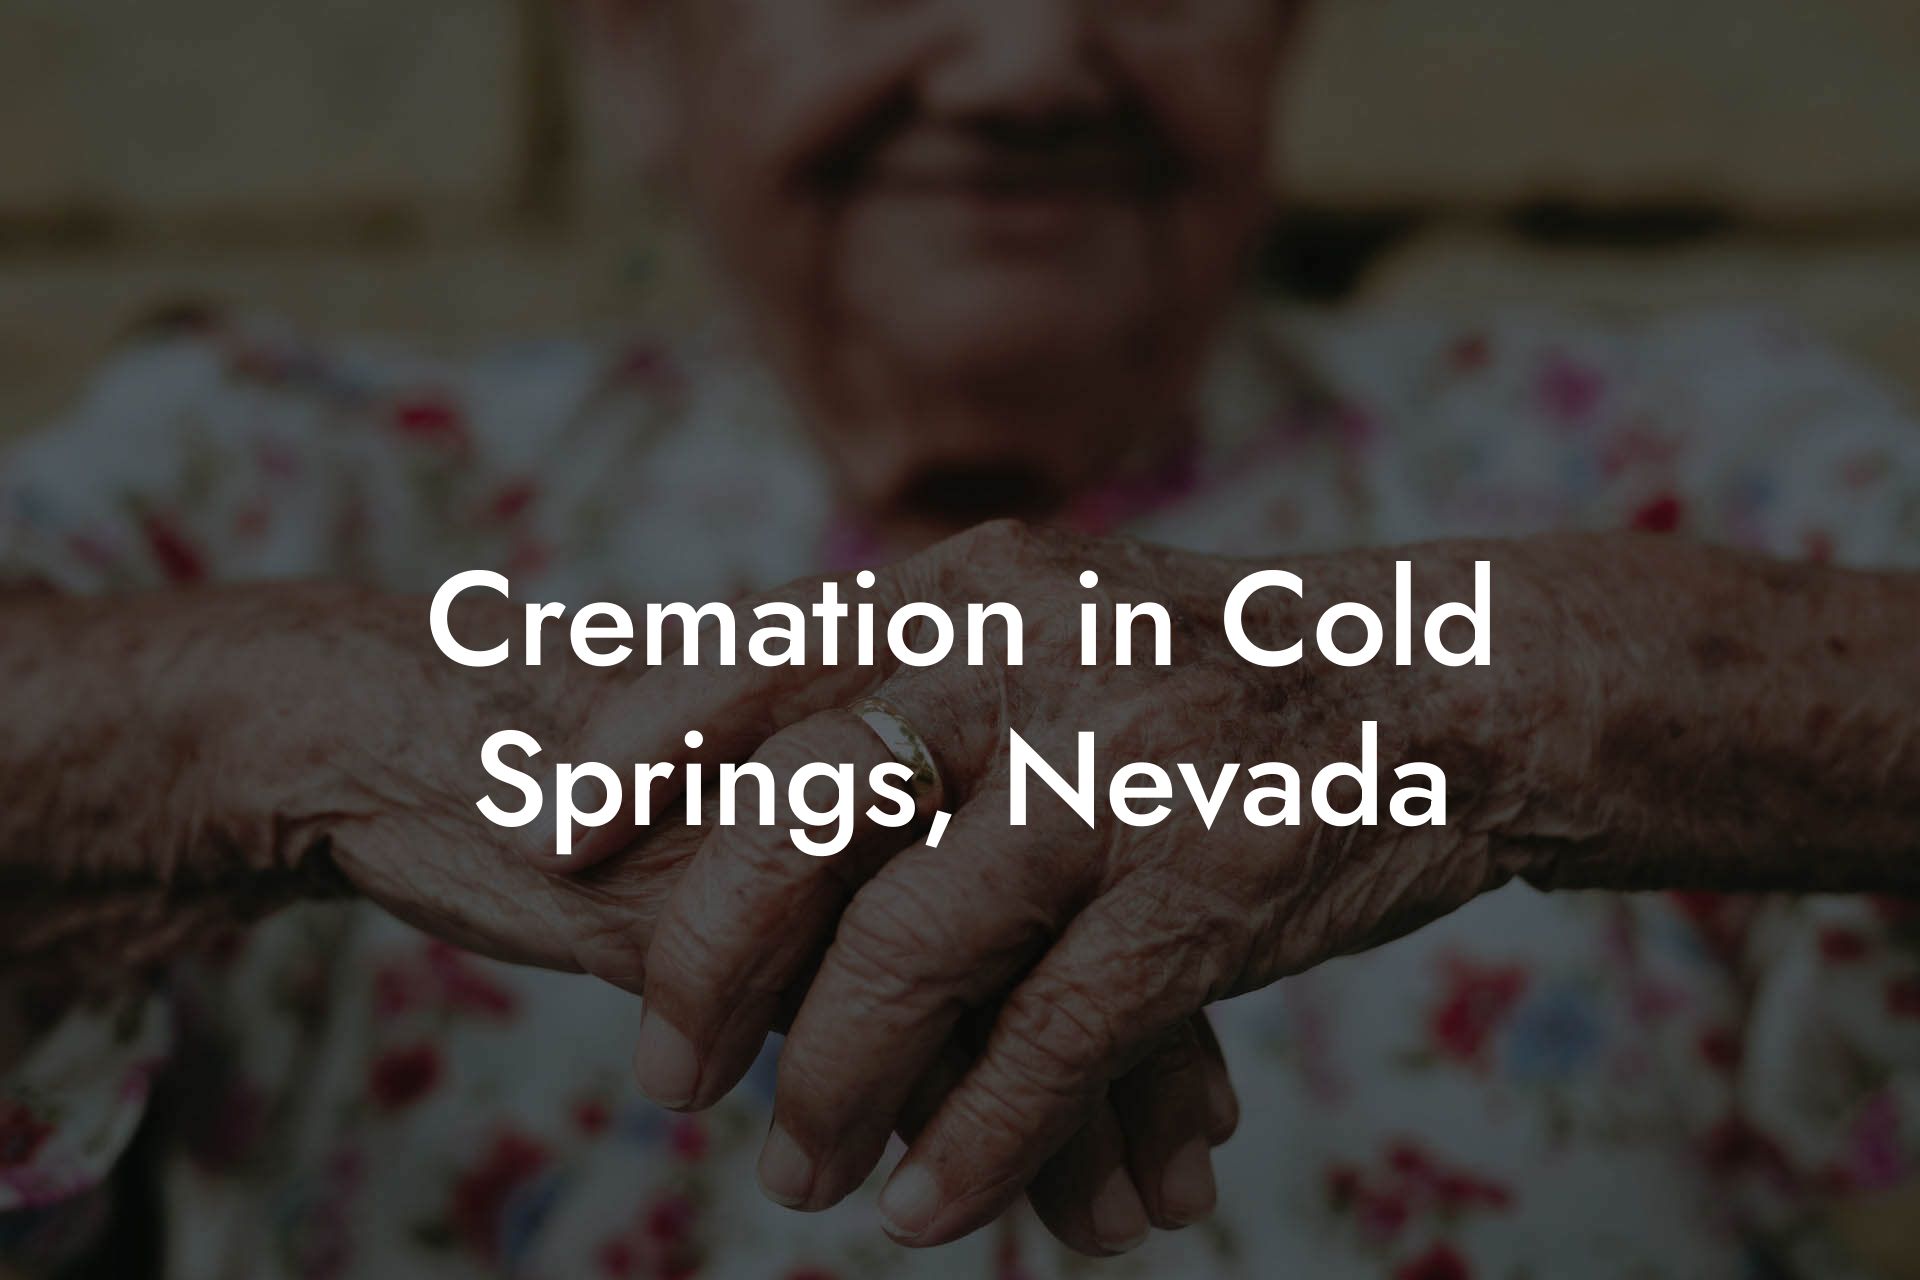 Cremation in Cold Springs, Nevada